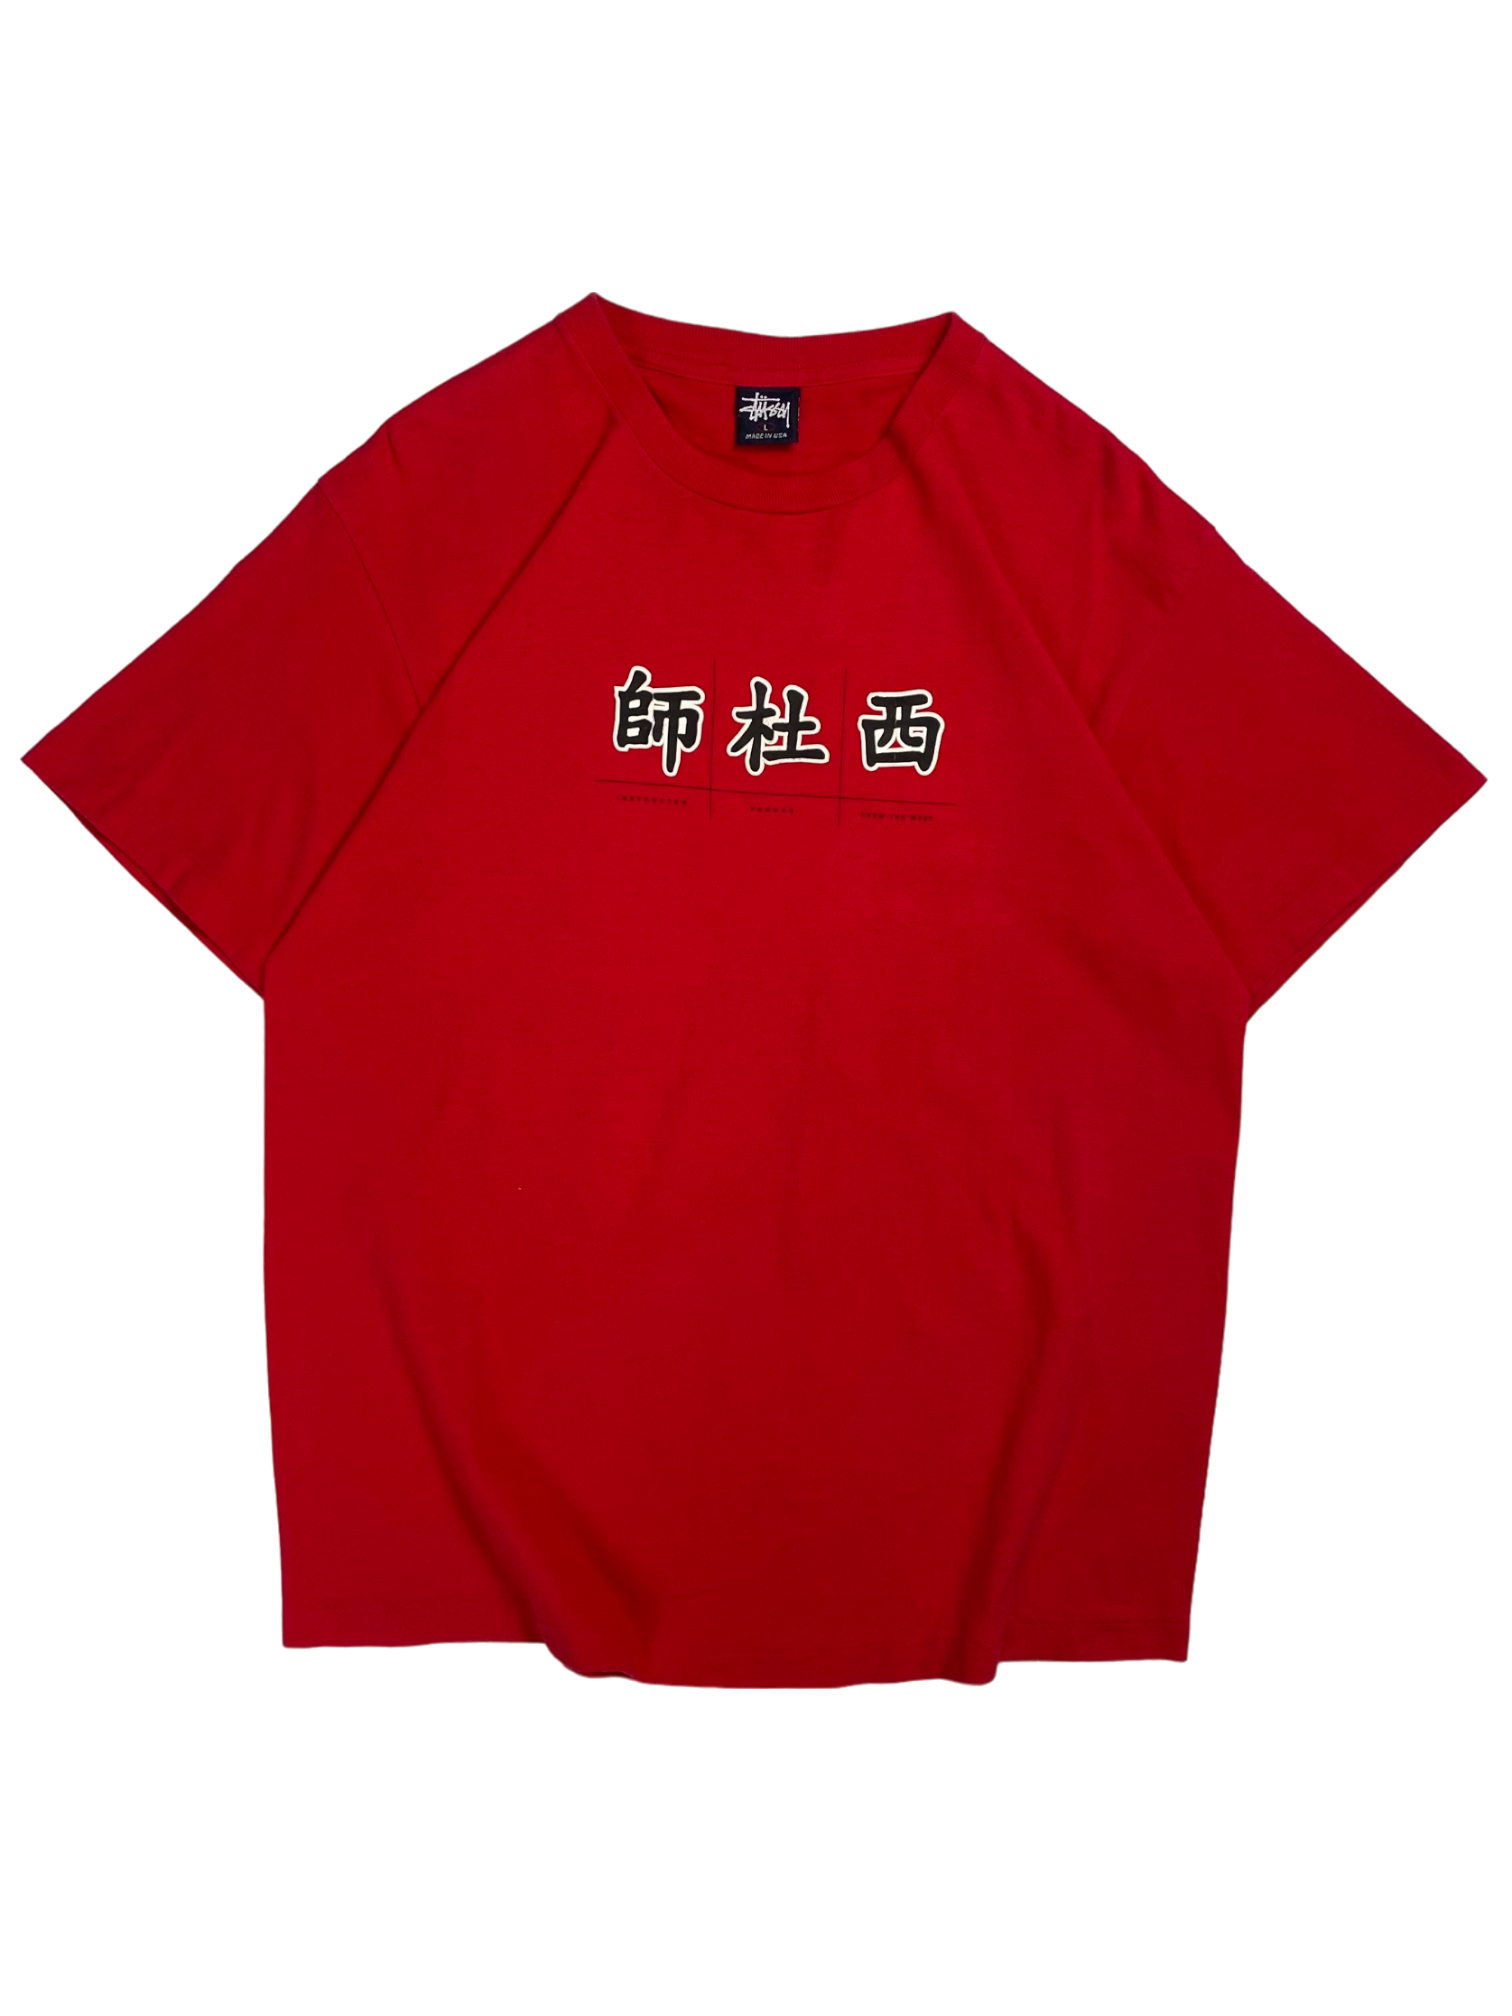 Stüssy Vintage Red Instructor From The West Tee